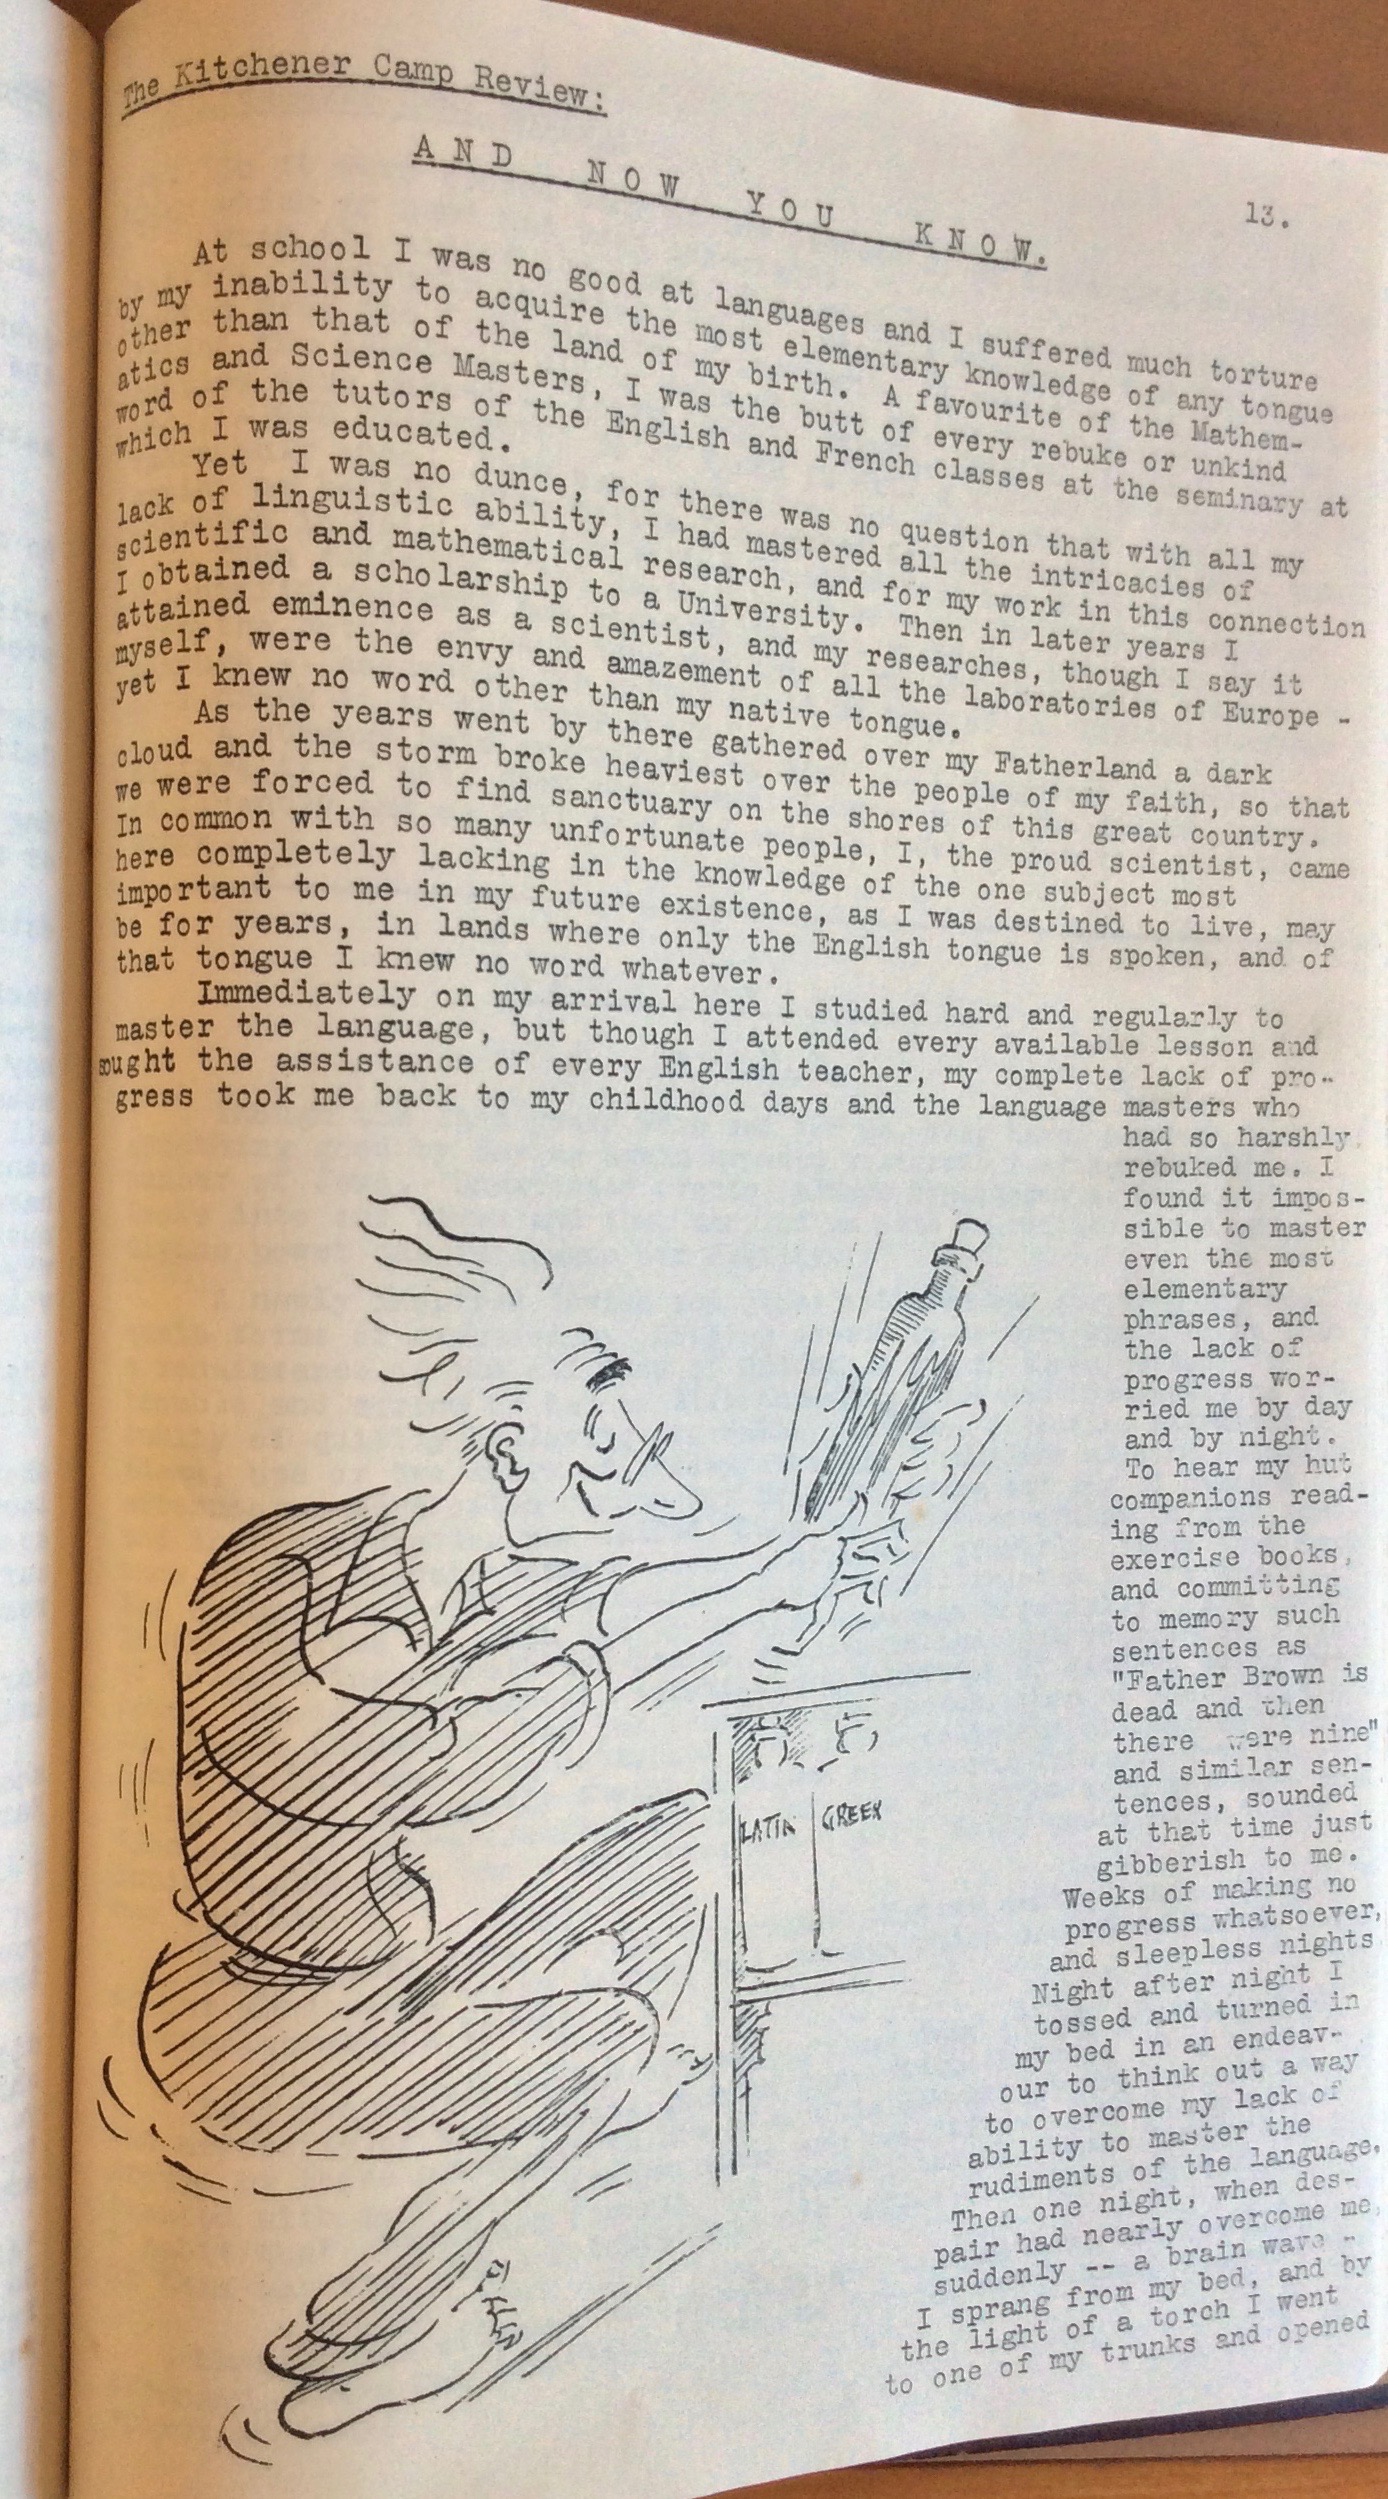 The Kitchener Camp Review, August 1939, page 13